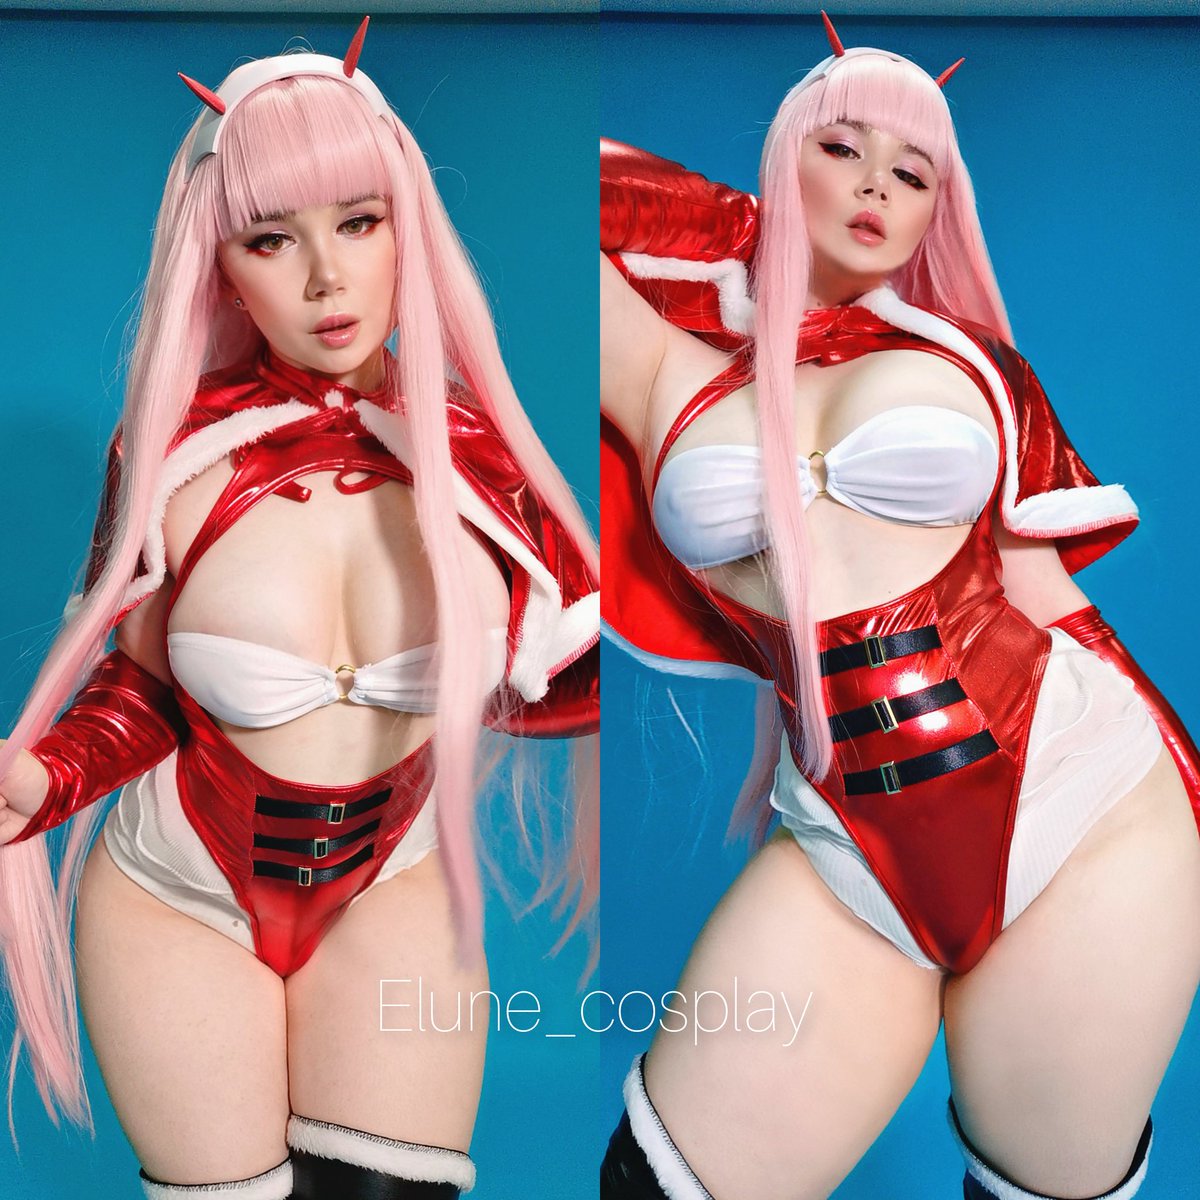 Zero Two cosplay for you 🍭 More of this H 🔥 t candy on my 🅾 ️F #Darlingi...